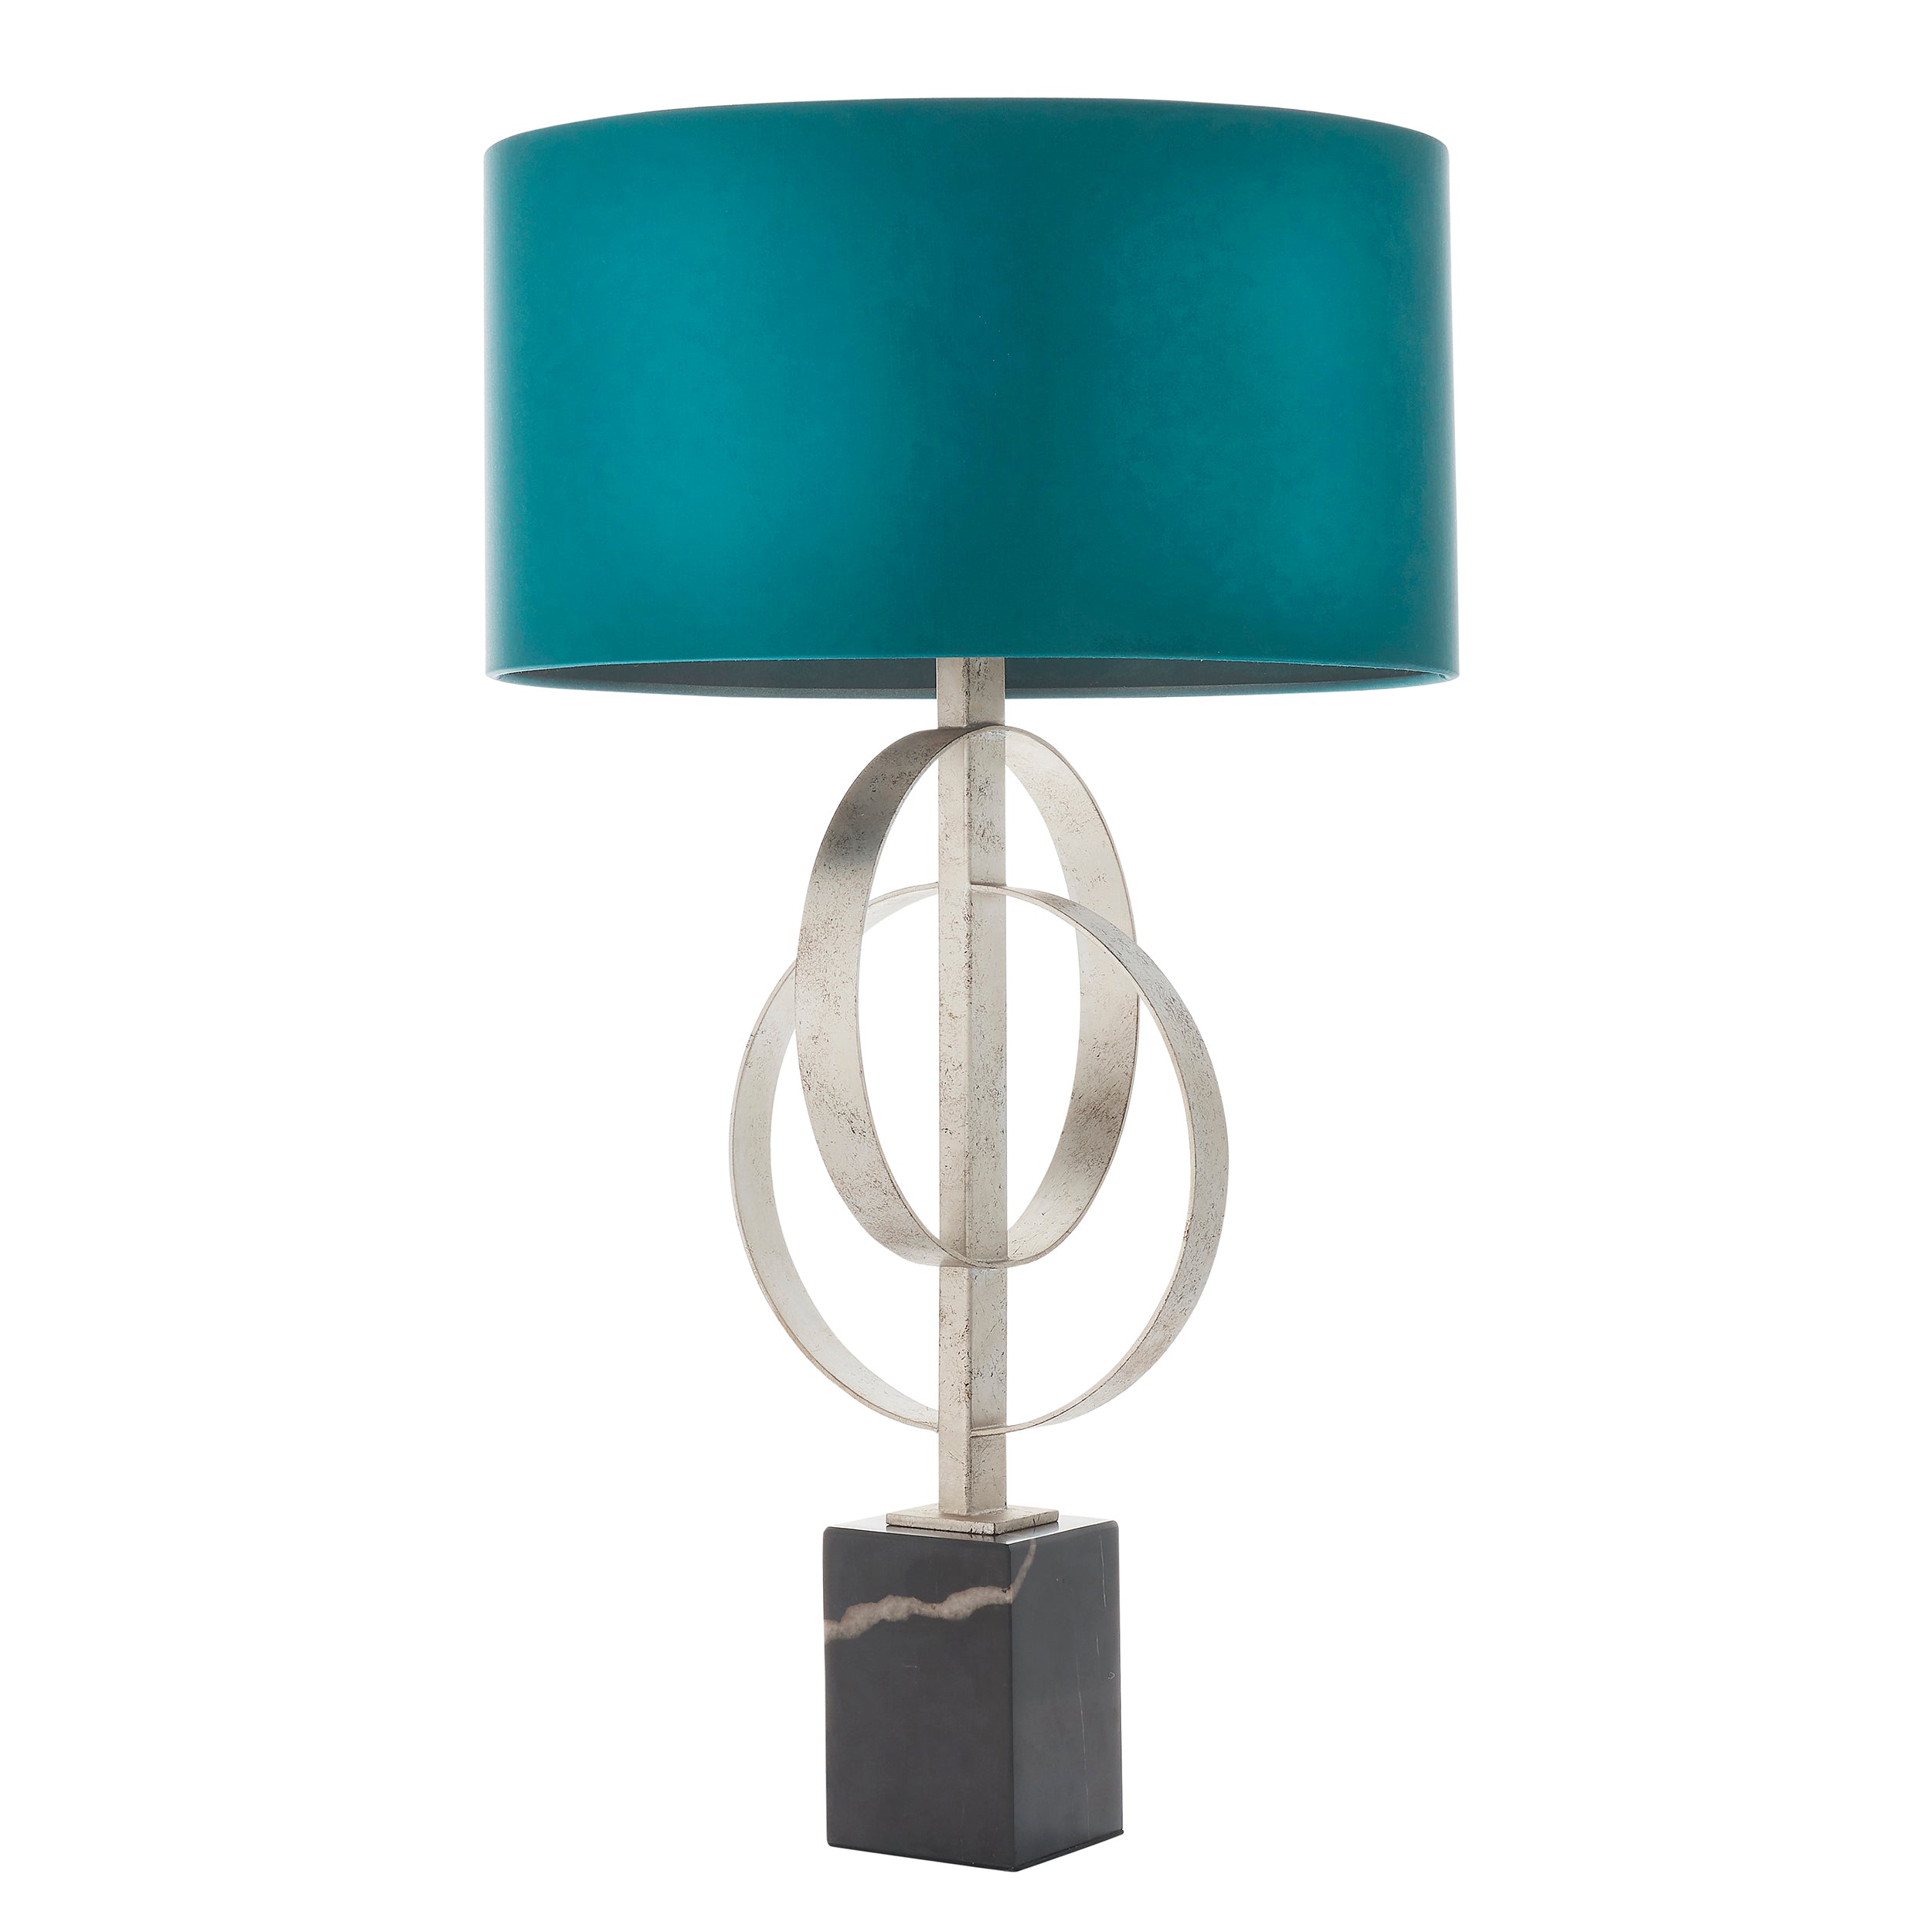 Lightologist Antique silver leaf & teal satin fabric Base & shade Table Light WIN1395225